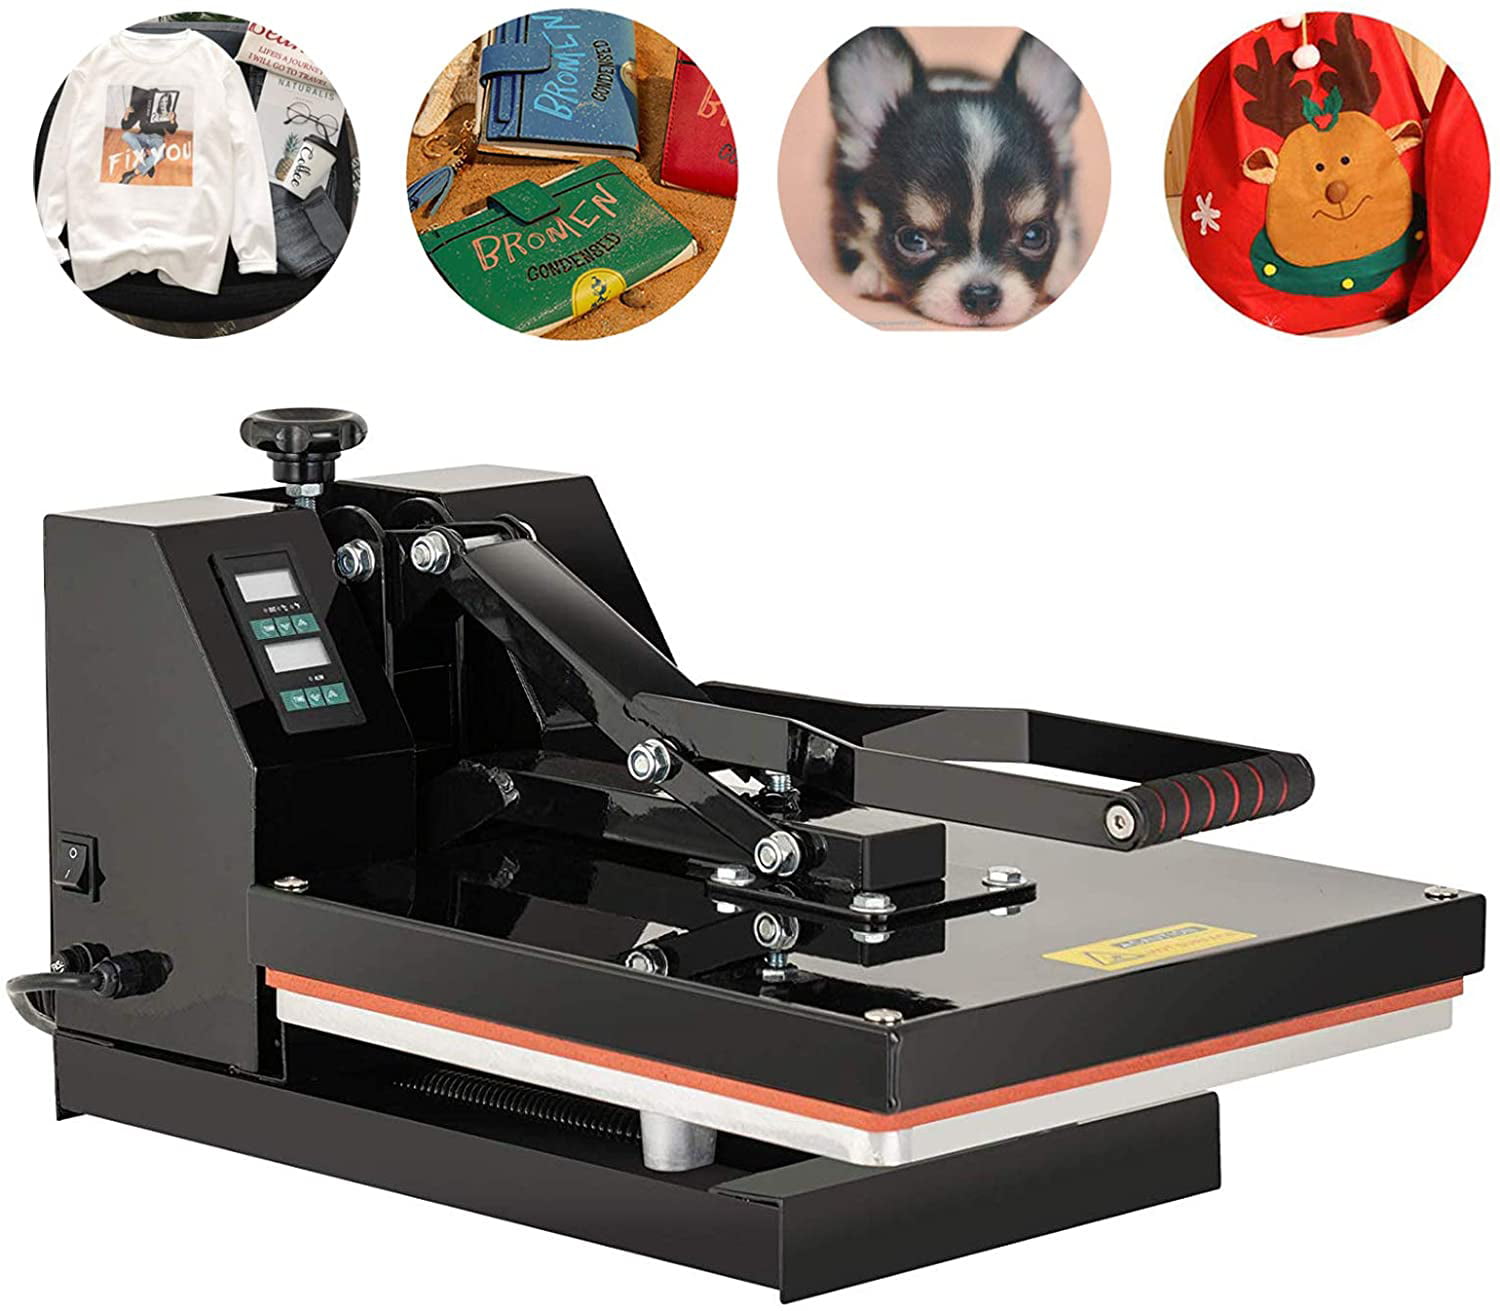 Heat Press Machine 15 x 15 Industrial Quality Digital Heat Transfer Printing Machine Clamshell Sublimation for T-Shirts 